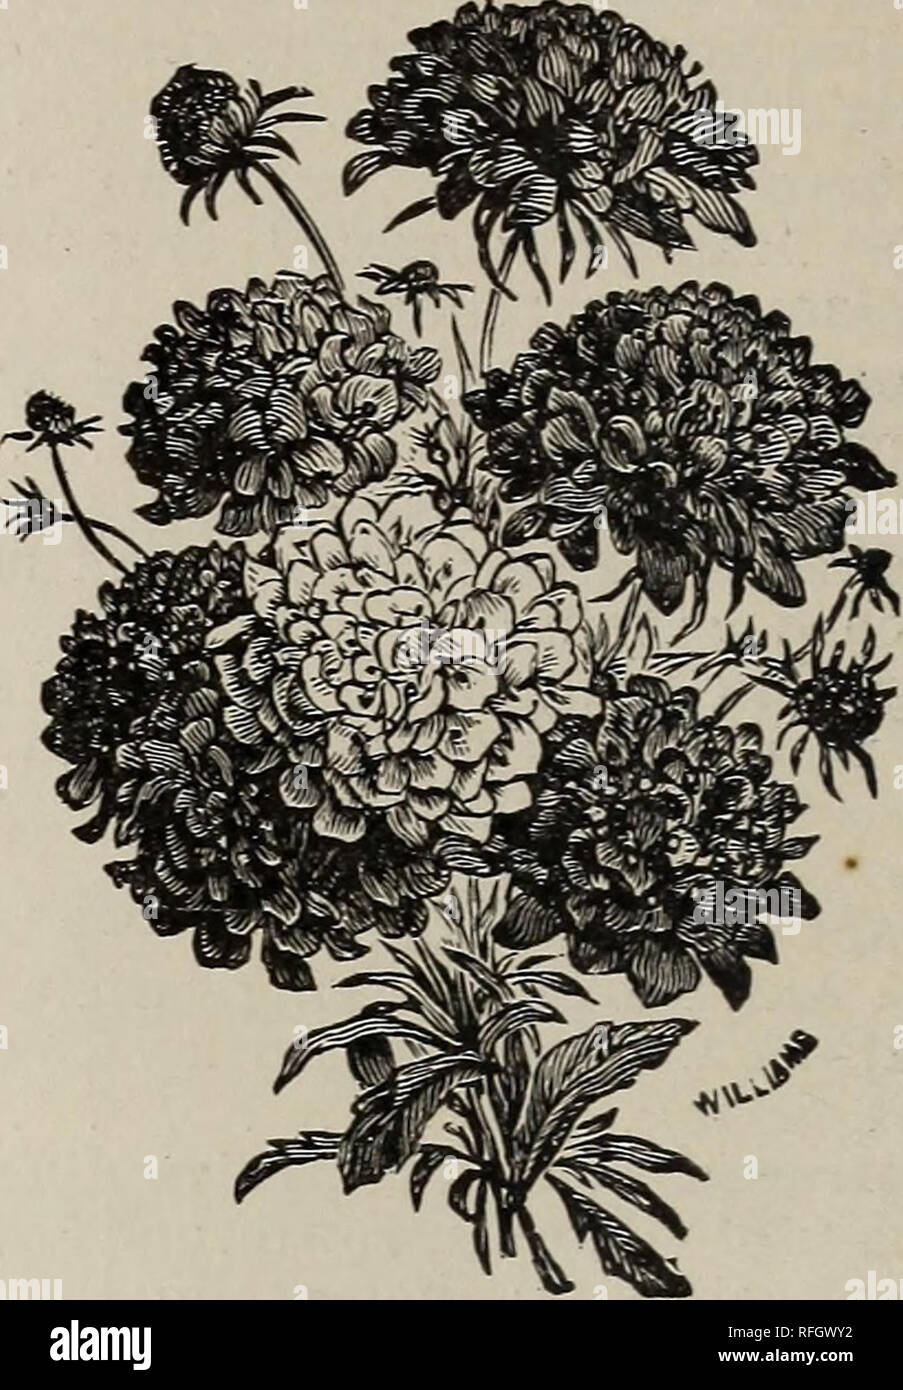 . Annual catalogue of garden, field and flower seeds : bulbs, plants, fertilizers and implements for the farm and garden. Vegetables Seeds Catalogs; Flowers Seeds Catalogs; Agricultural implements Catalogs; Commercial catalogs Rhode Island Providence. SALVIA. SCABIOSA. Saintpaulia lonantha—The plants are very dwarf and spreading, and produce very freely. violet-Hke flowers, both in shape and color. Excellent for pot culture in the green-house or window 10 Salpiglossis — Grandiflora— Fiqest mixed. One of the most beautiful flowering plants, with very large, richly-colored Petunia-like flowers,  Stock Photo